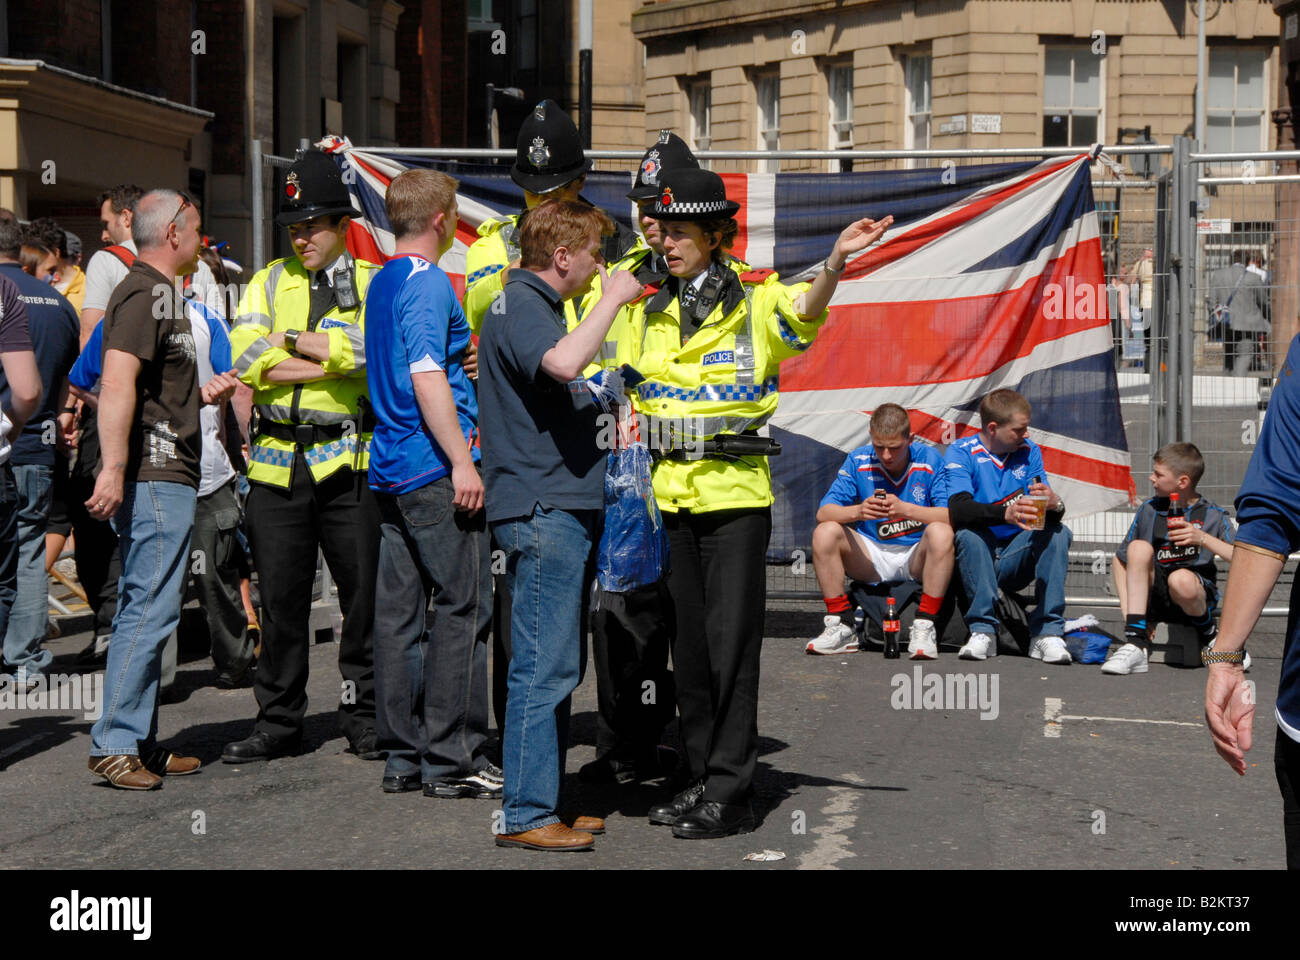 Police officers give directions to Glasgow rangers football fans on the day of the Euro final, 2008 in Manchester. Stock Photo